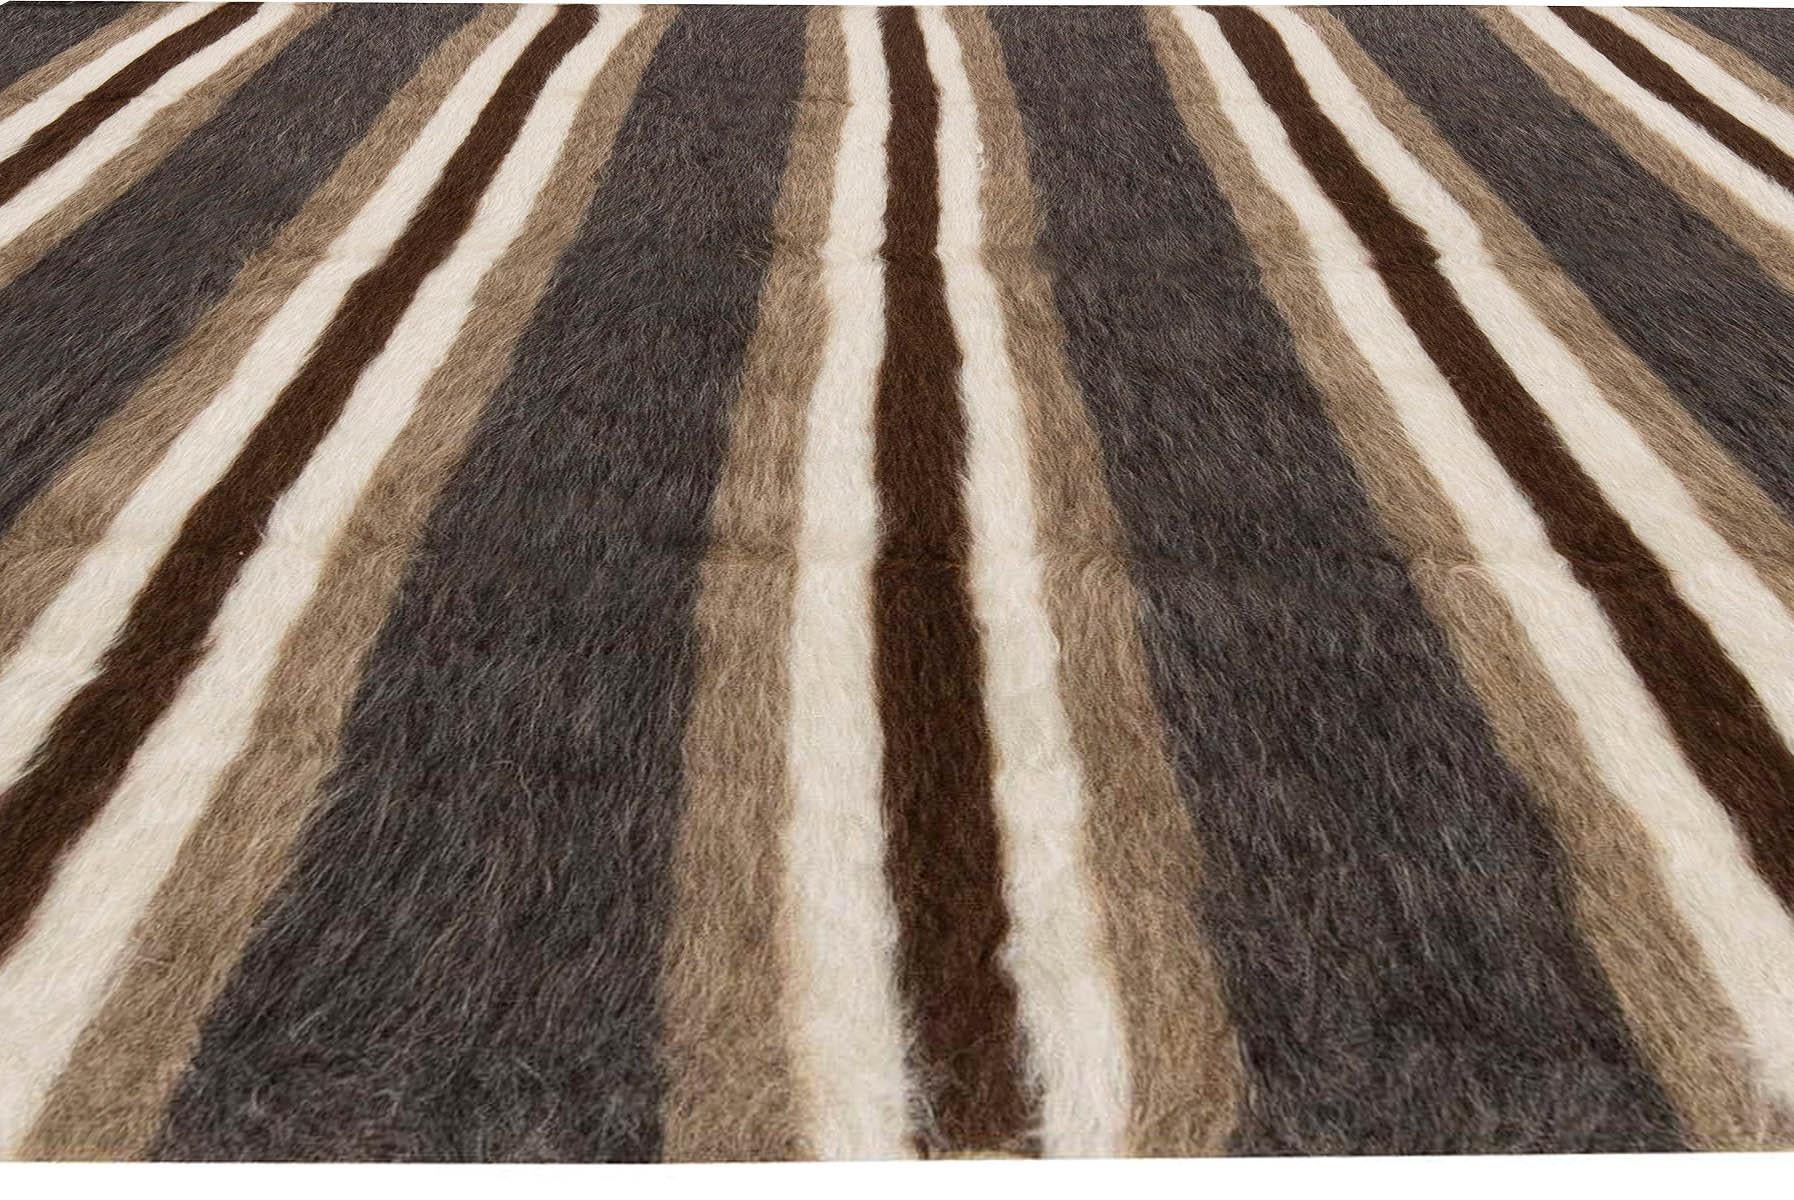 Turkish Taurus Collection Striped Brown, White, Grey, Goat Hair Rug by Doris Leslie Blau For Sale